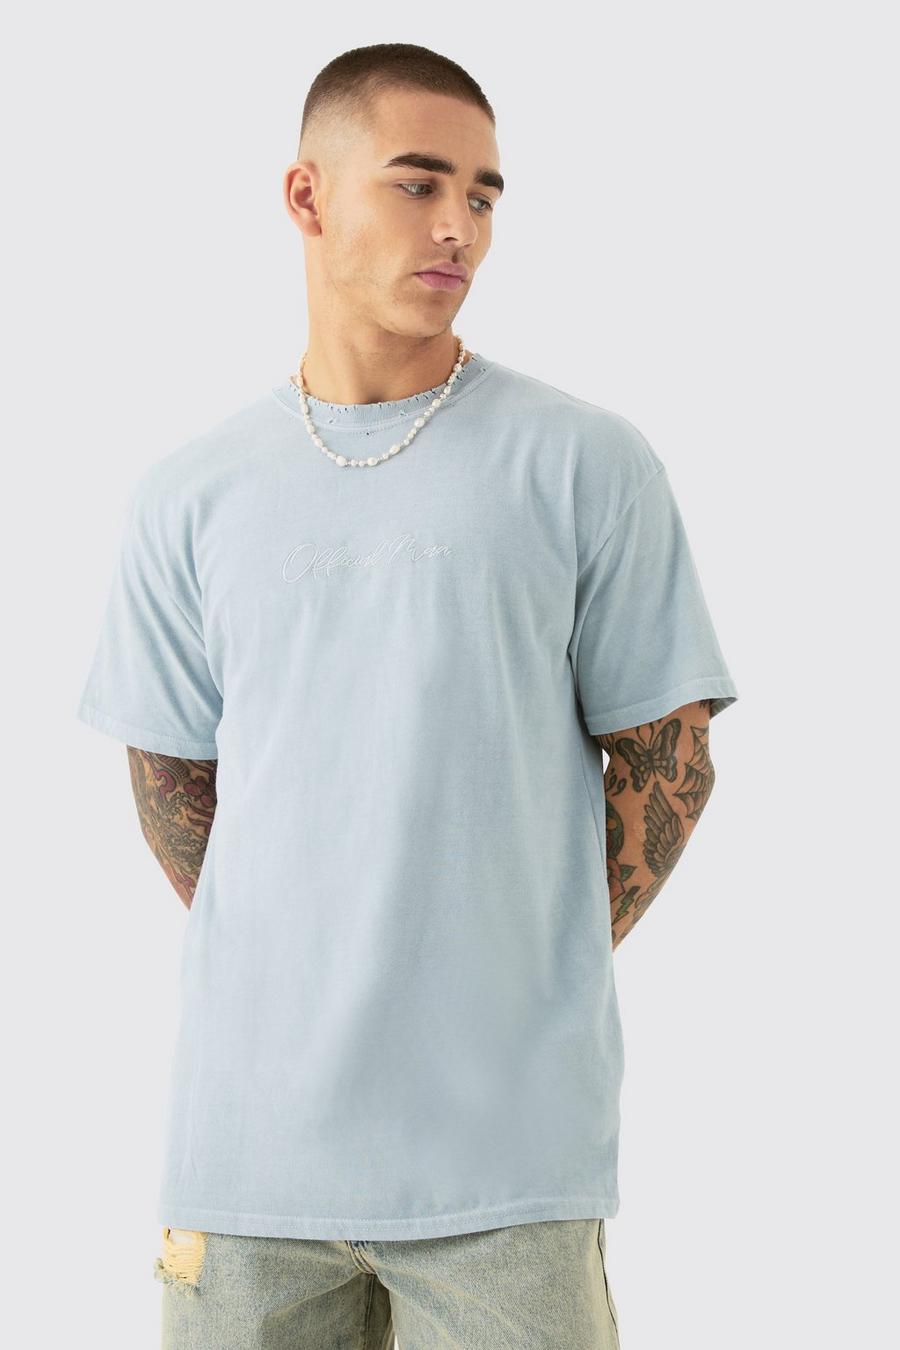 Grey Oversized Distressed Neck Embroidered T-shirt